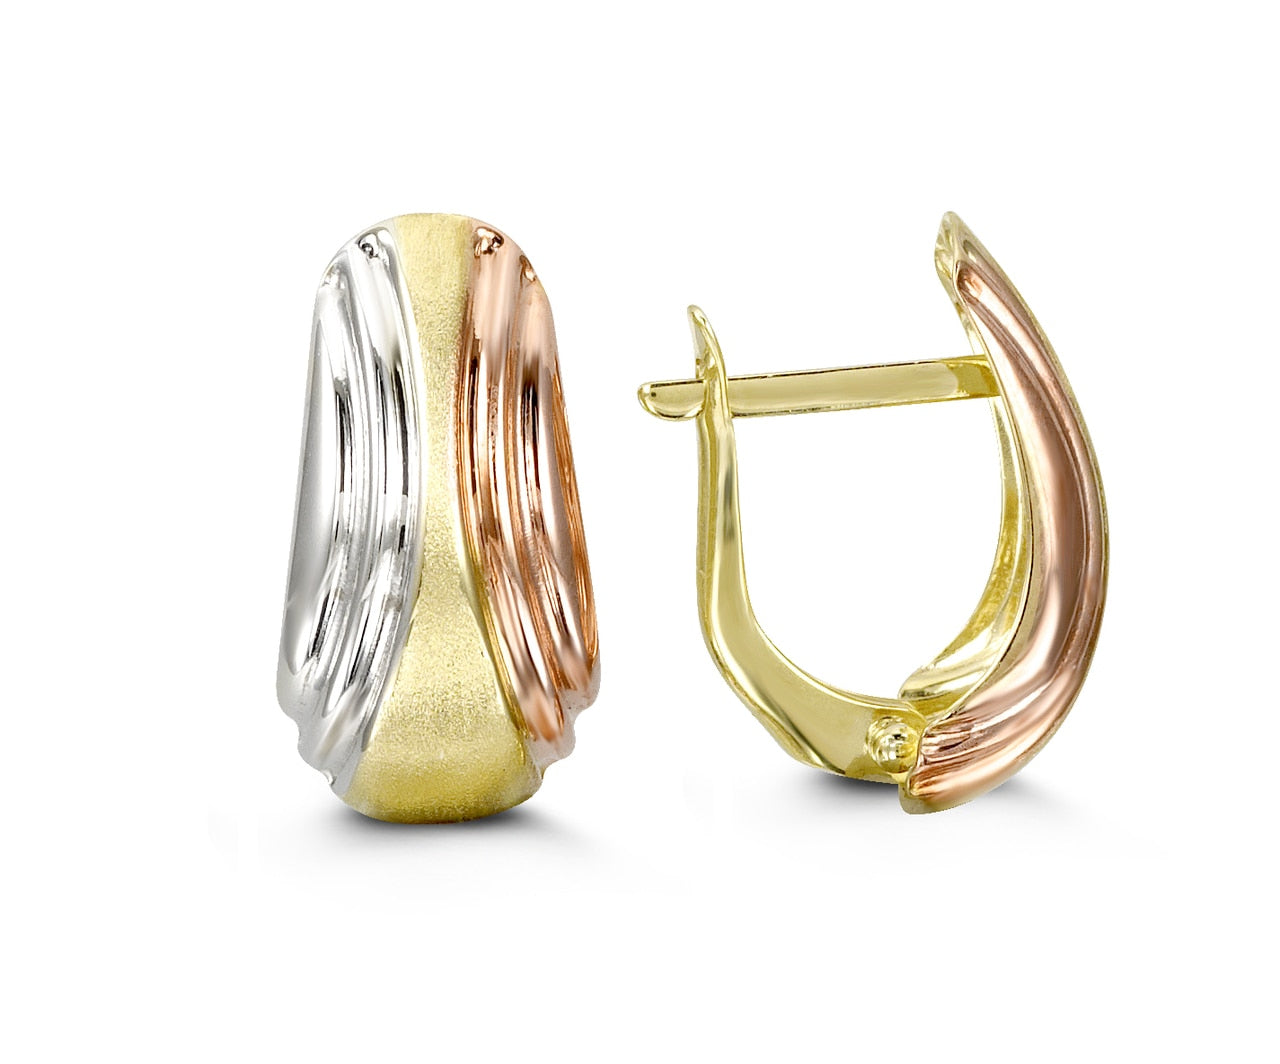 Elegant tri-color 10K gold twisted hoop earrings showcasing yellow, white, and rose gold, polished to a high shine with a secure closure.